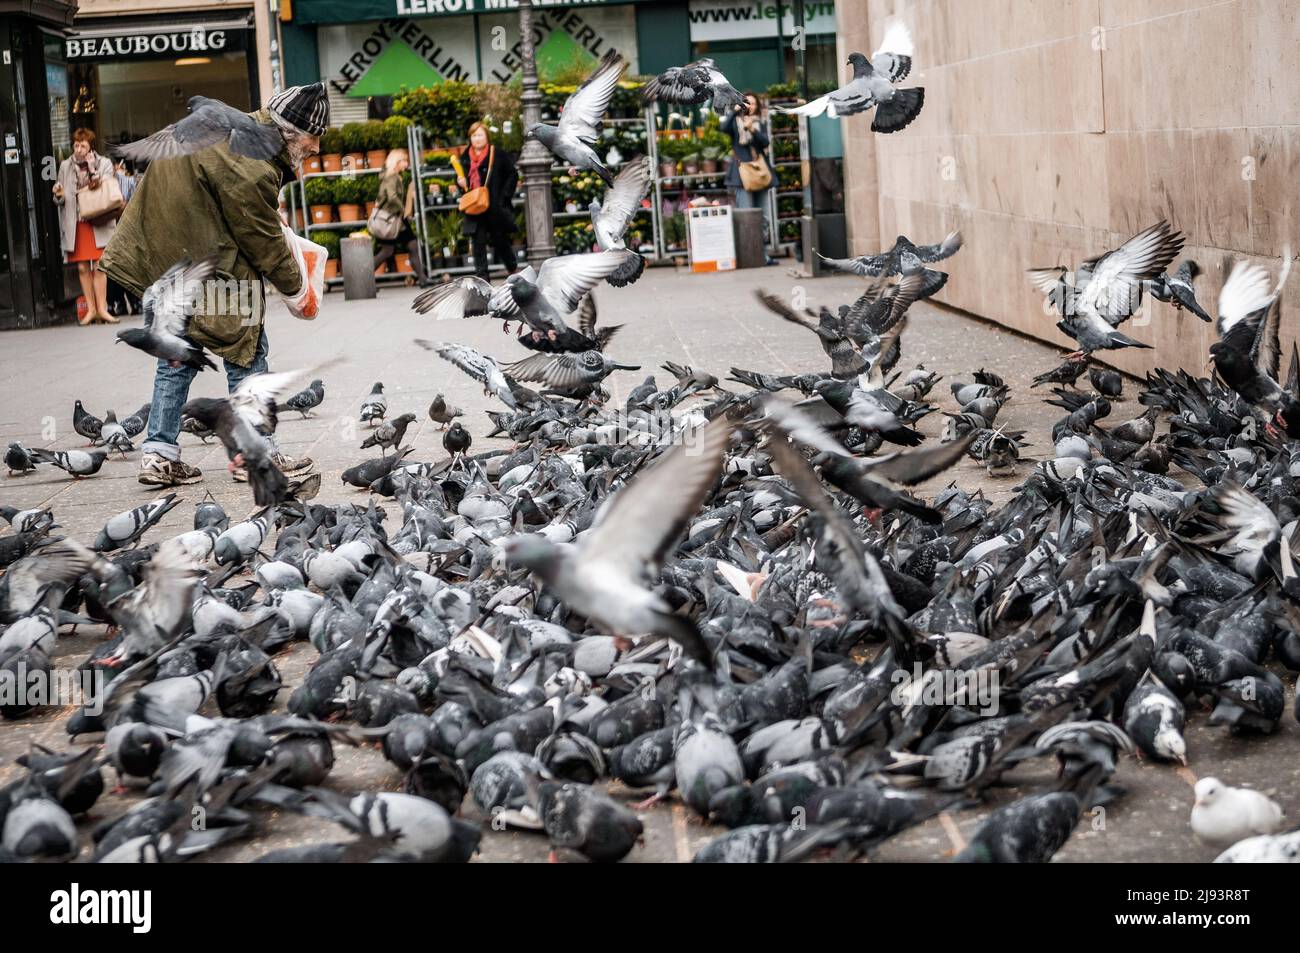 Giuseppe Belvedere feeds the pigeons near the Pompidou Centre in Paris, France Stock Photo